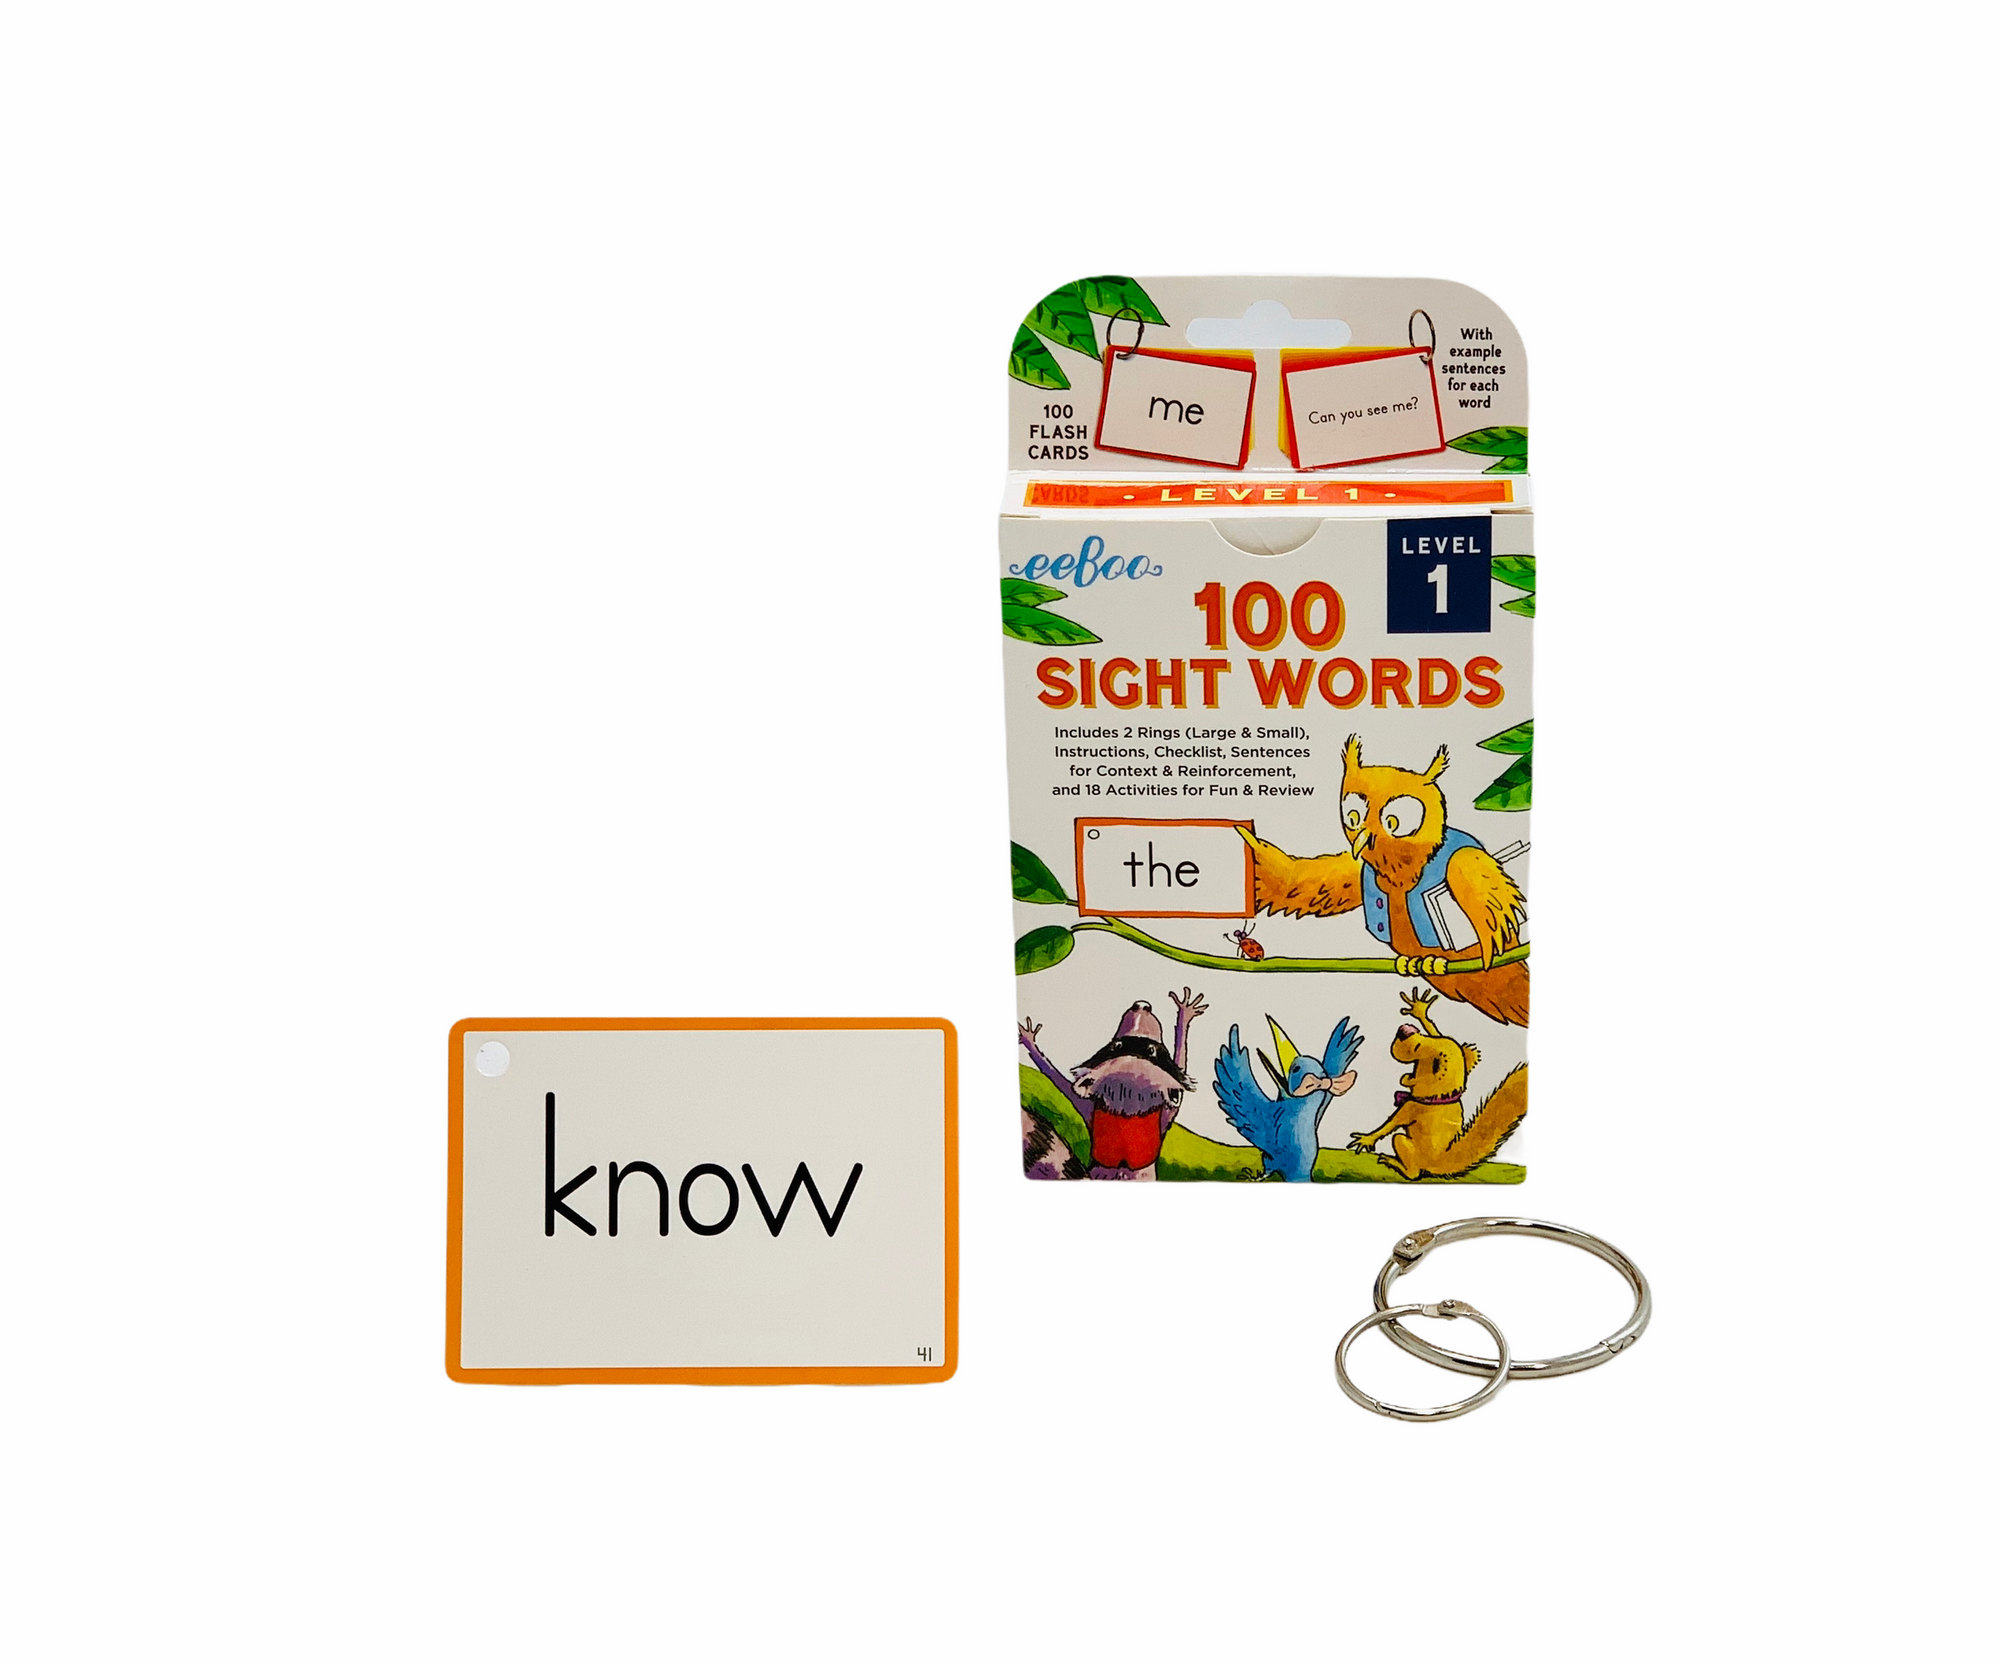 Eeboo 100 Sight Words - Level 1 with a card displaying the word 'know' in front of packaging box on white background